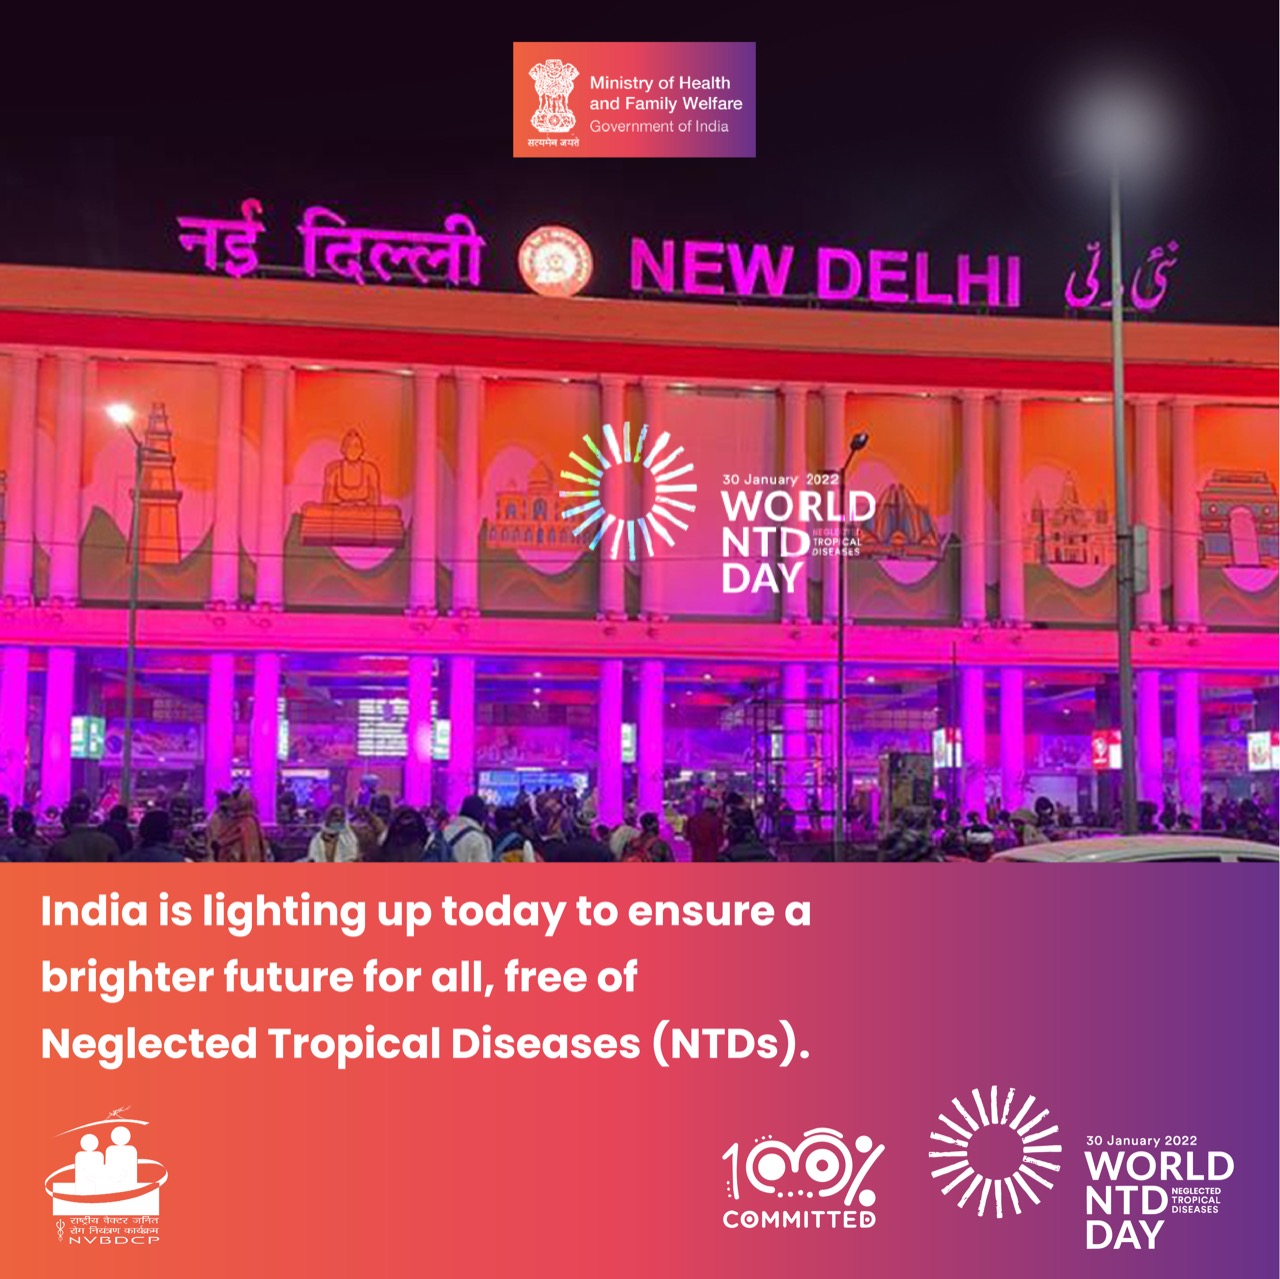 On #WorldNTDDay, India will illuminate the iconic New Delhi Railway Station to join a global movement to combat Neglected Tropical Diseases (NTDs). Let's come together and spread awareness about these diseases - 30 Jan 2022